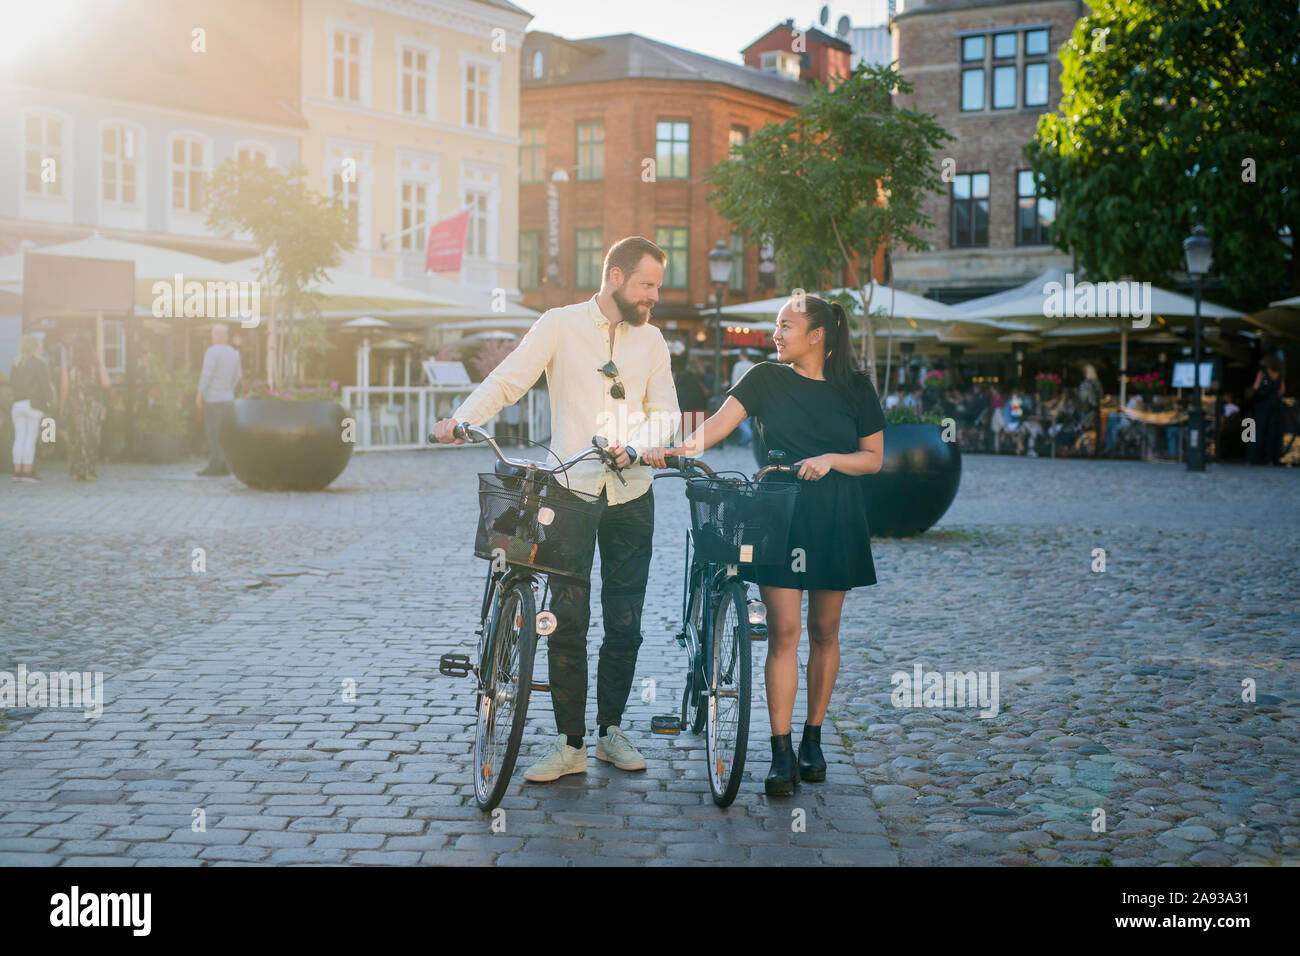 Couple walking with bicycles Stock Photo